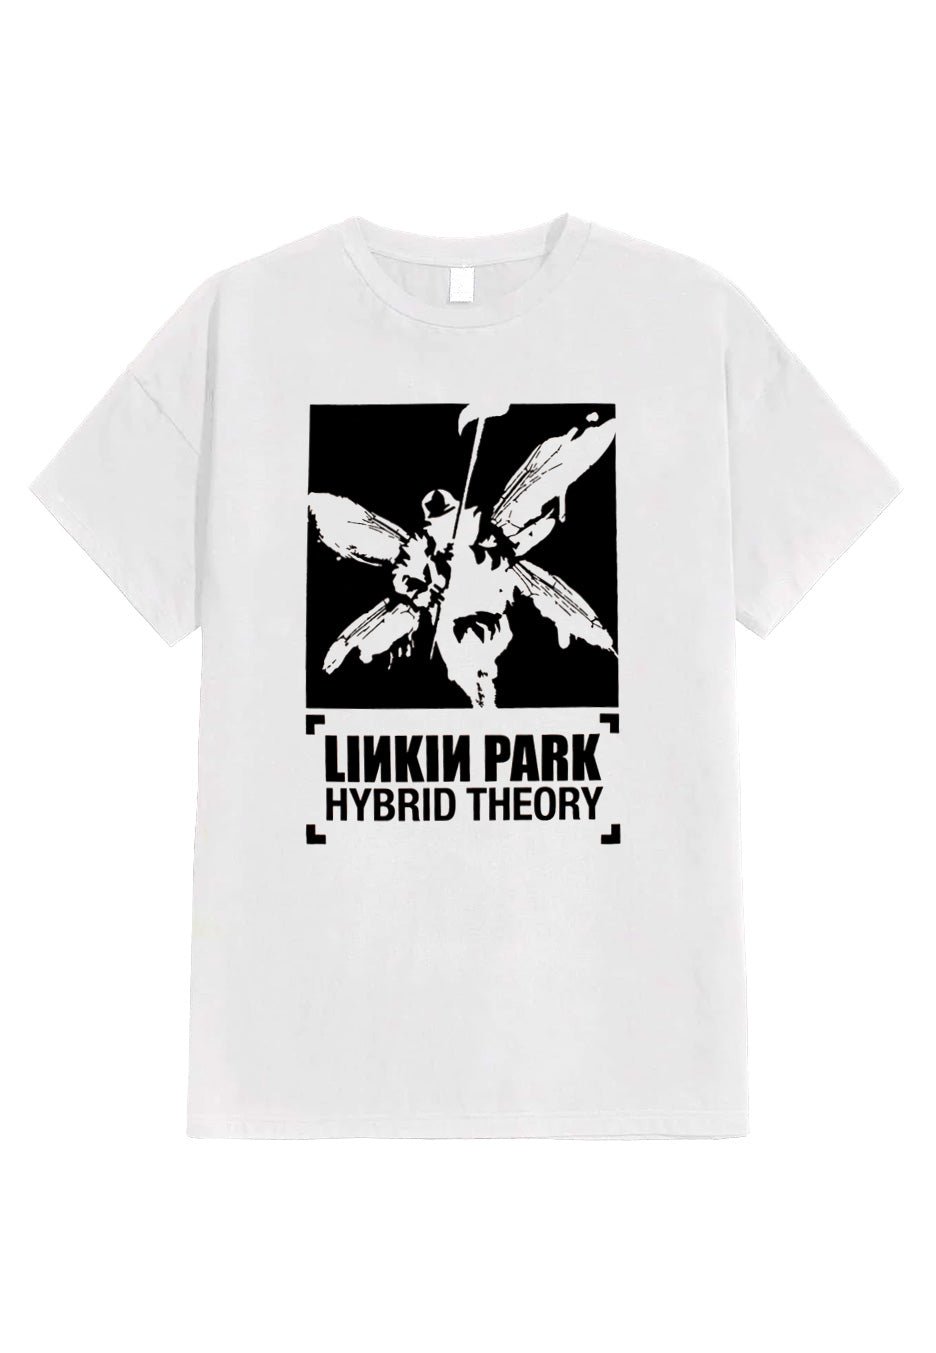 Linkin Park - Soldier Hybrid Theory White - T-Shirt